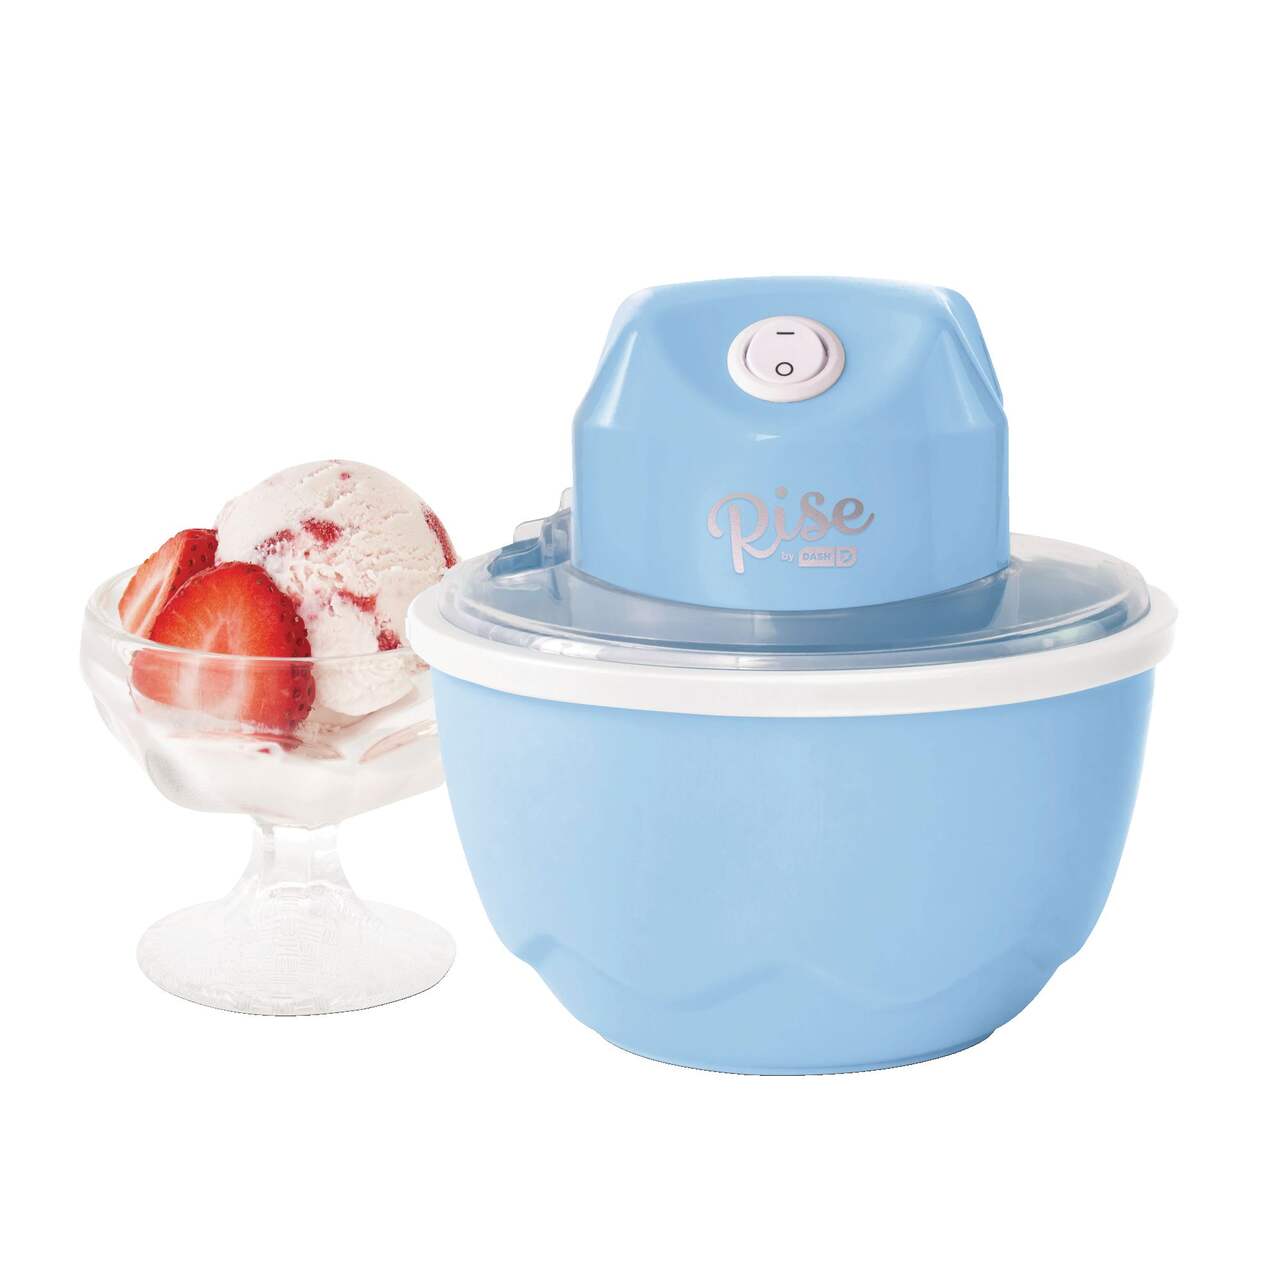 https://media-www.canadiantire.ca/product/living/kitchen/kitchen-appliances/0437062/rise-by-dash-my-pint-ice-cream-maker-b667e5e6-e28f-4491-8ea3-818f093ef698-jpgrendition.jpg?imdensity=1&imwidth=1244&impolicy=mZoom